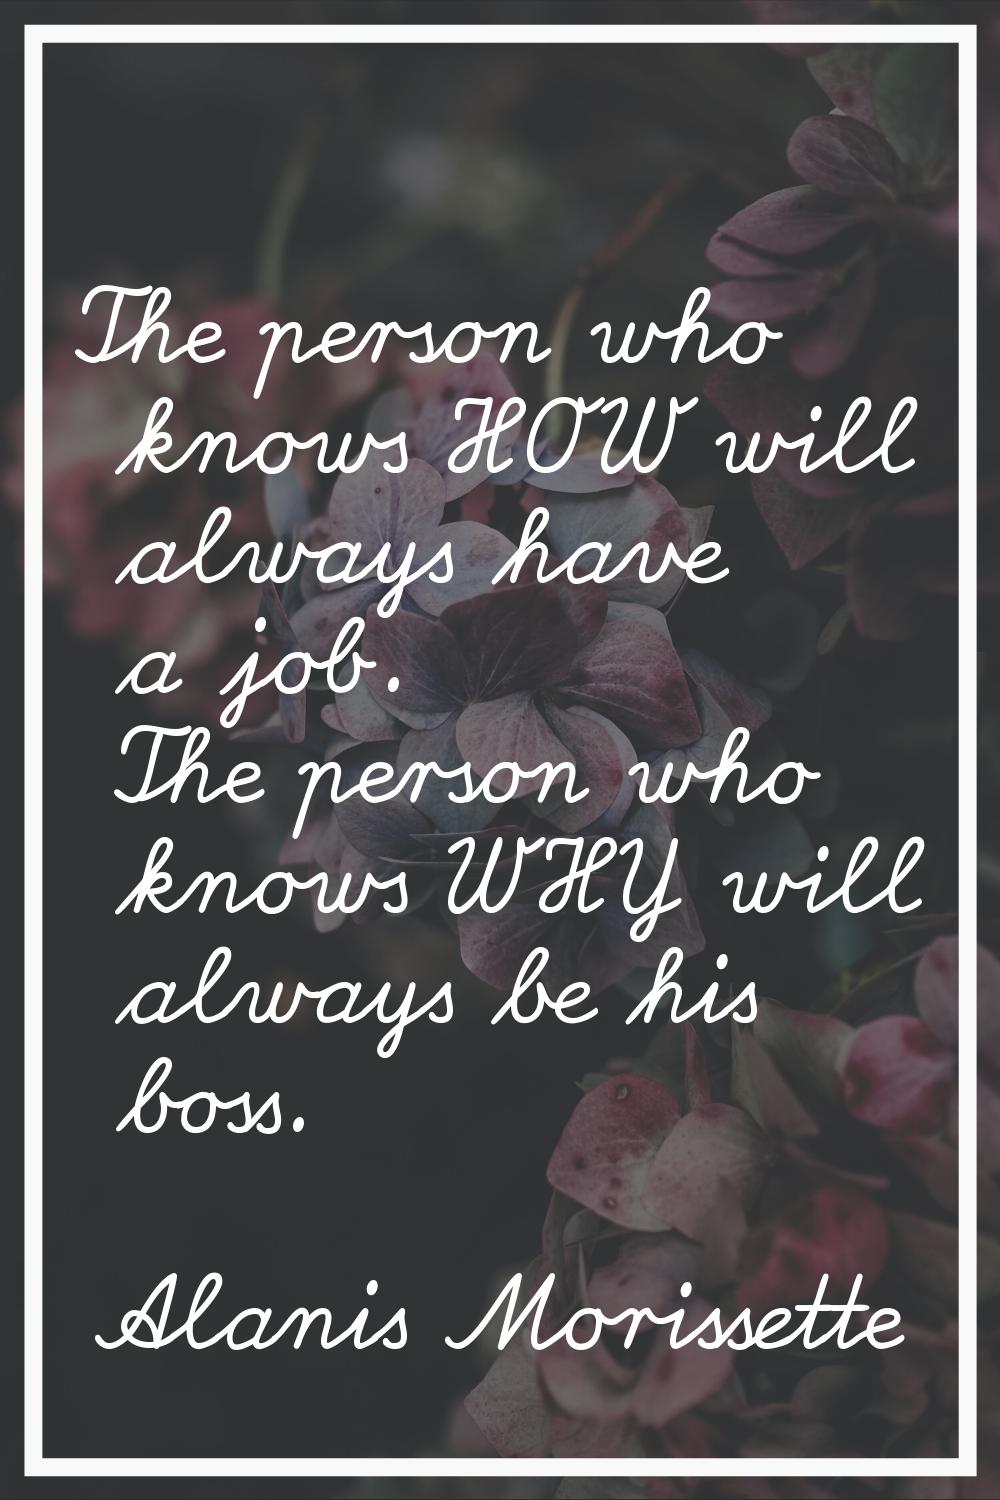 The person who knows HOW will always have a job. The person who knows WHY will always be his boss.